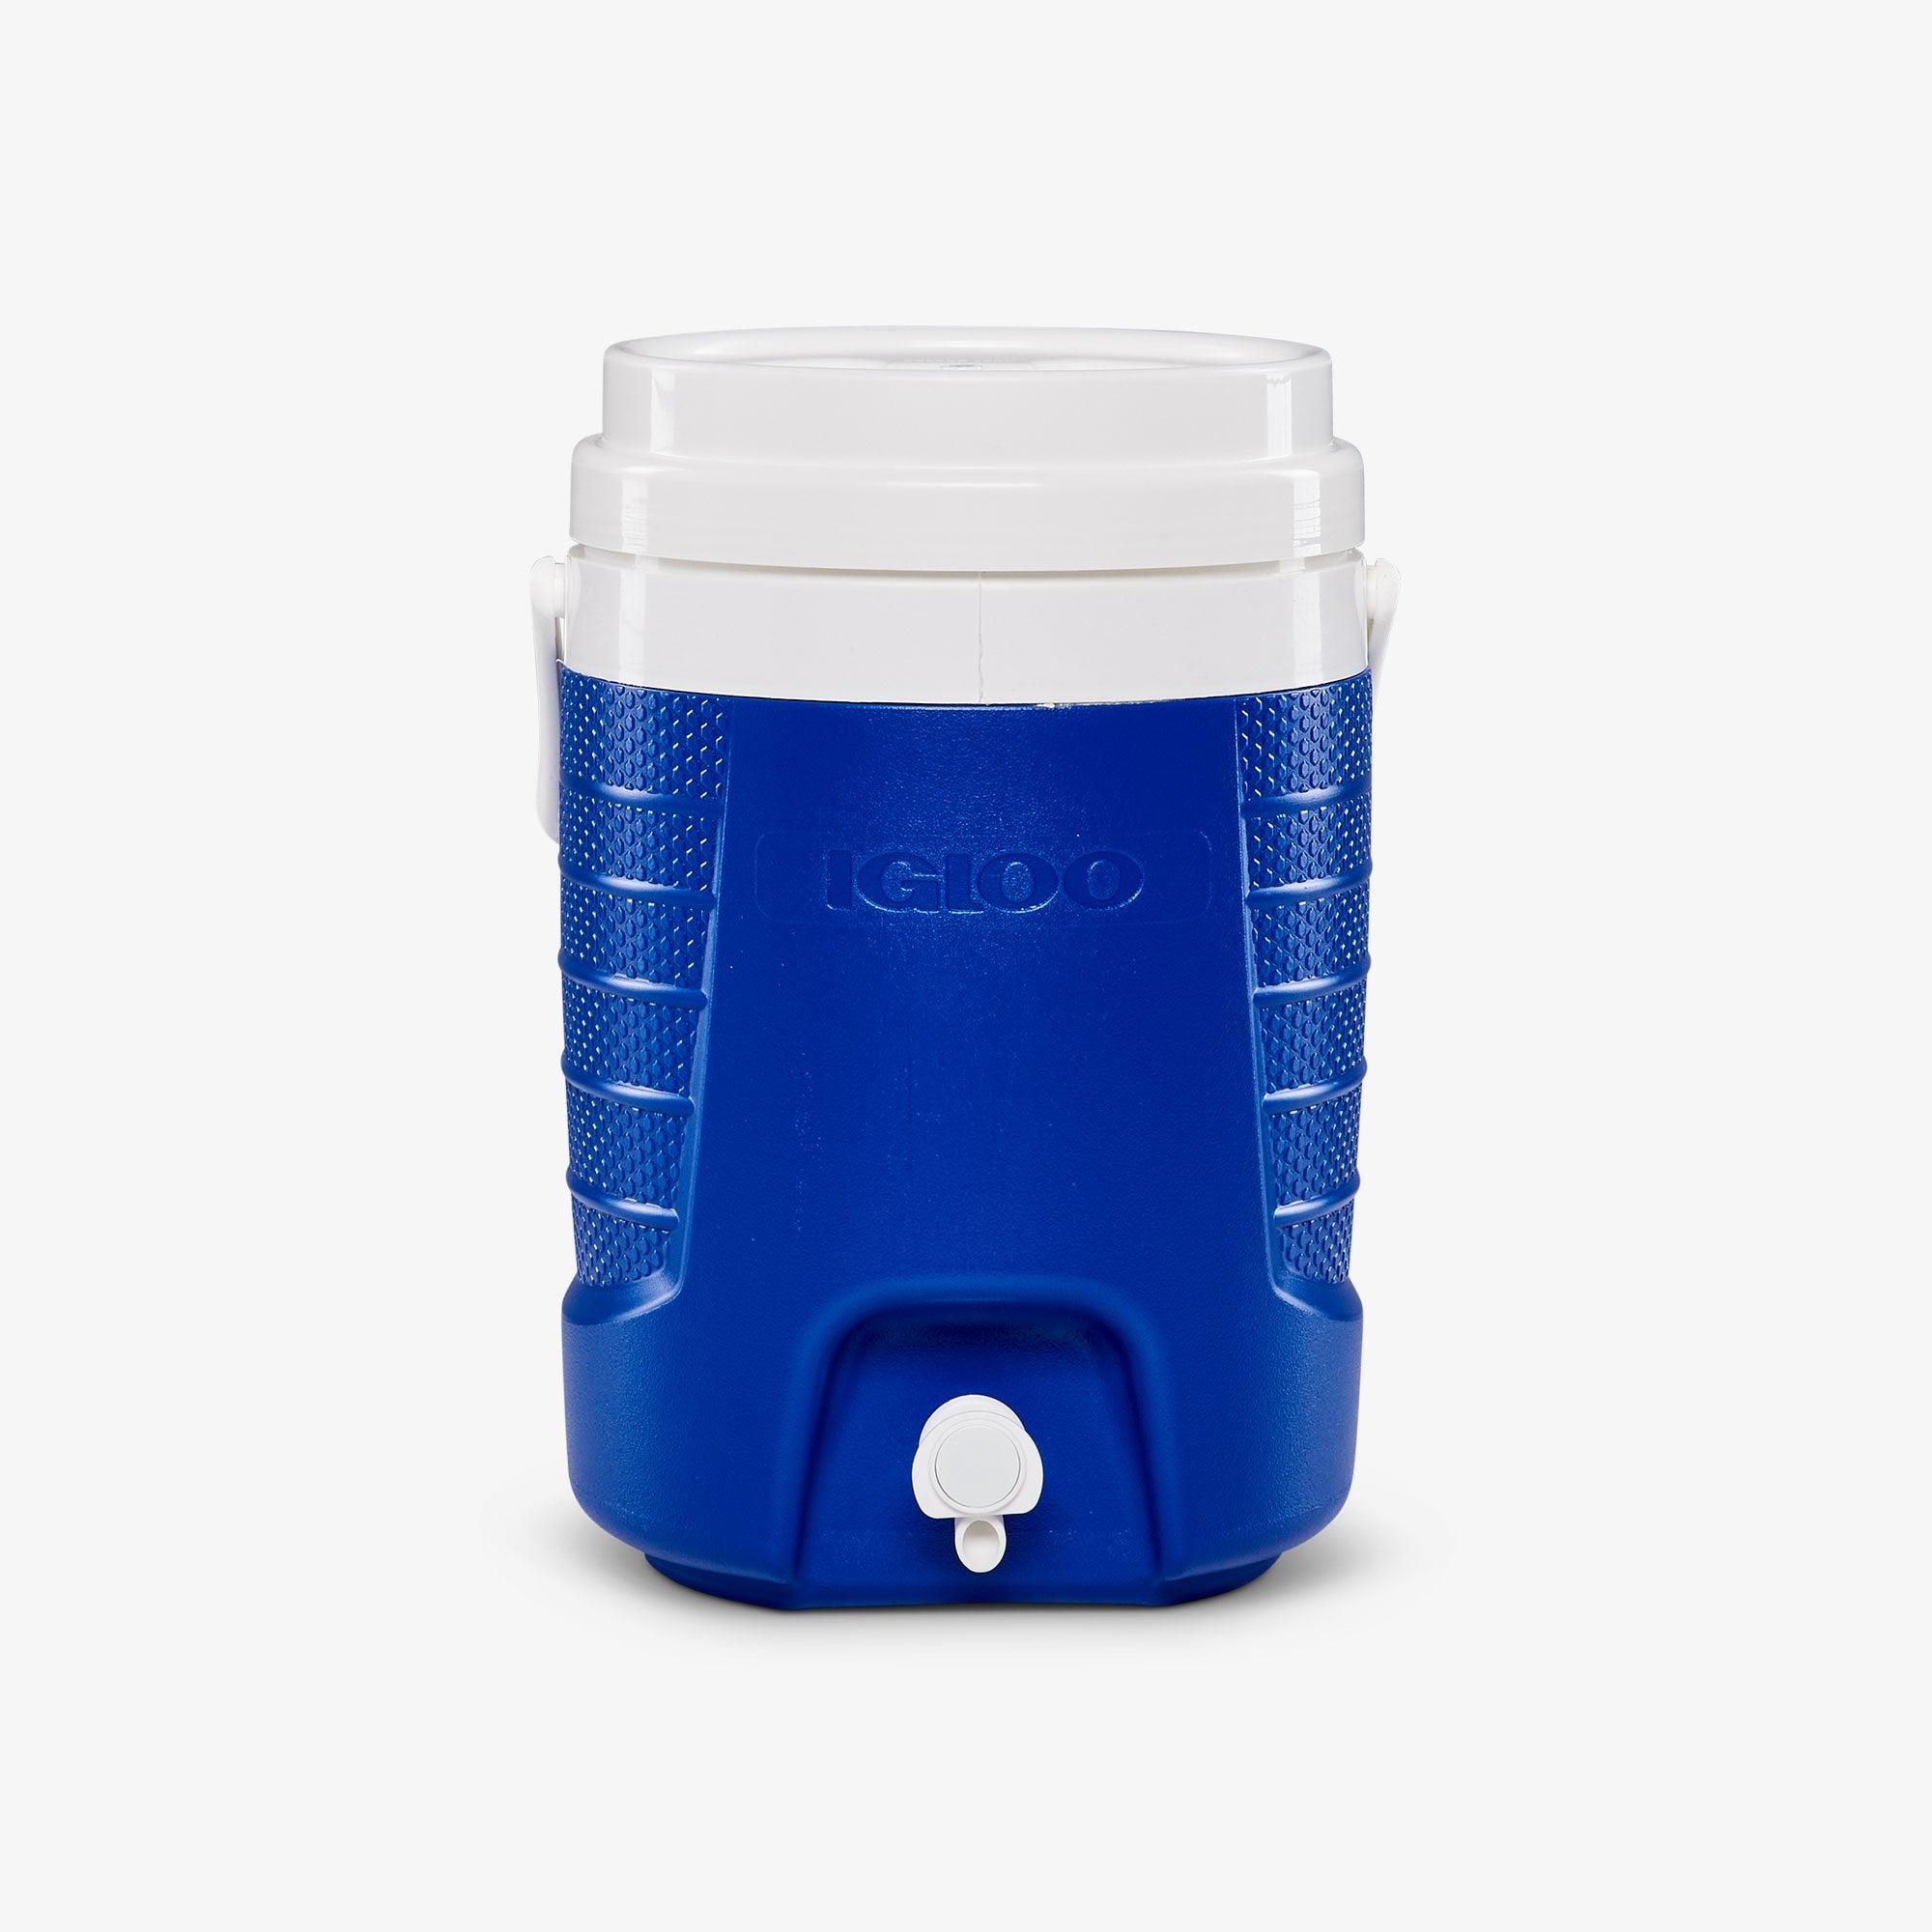 3 Gallon Water Container with Lid and Spout - Drink Dispenser for Parties